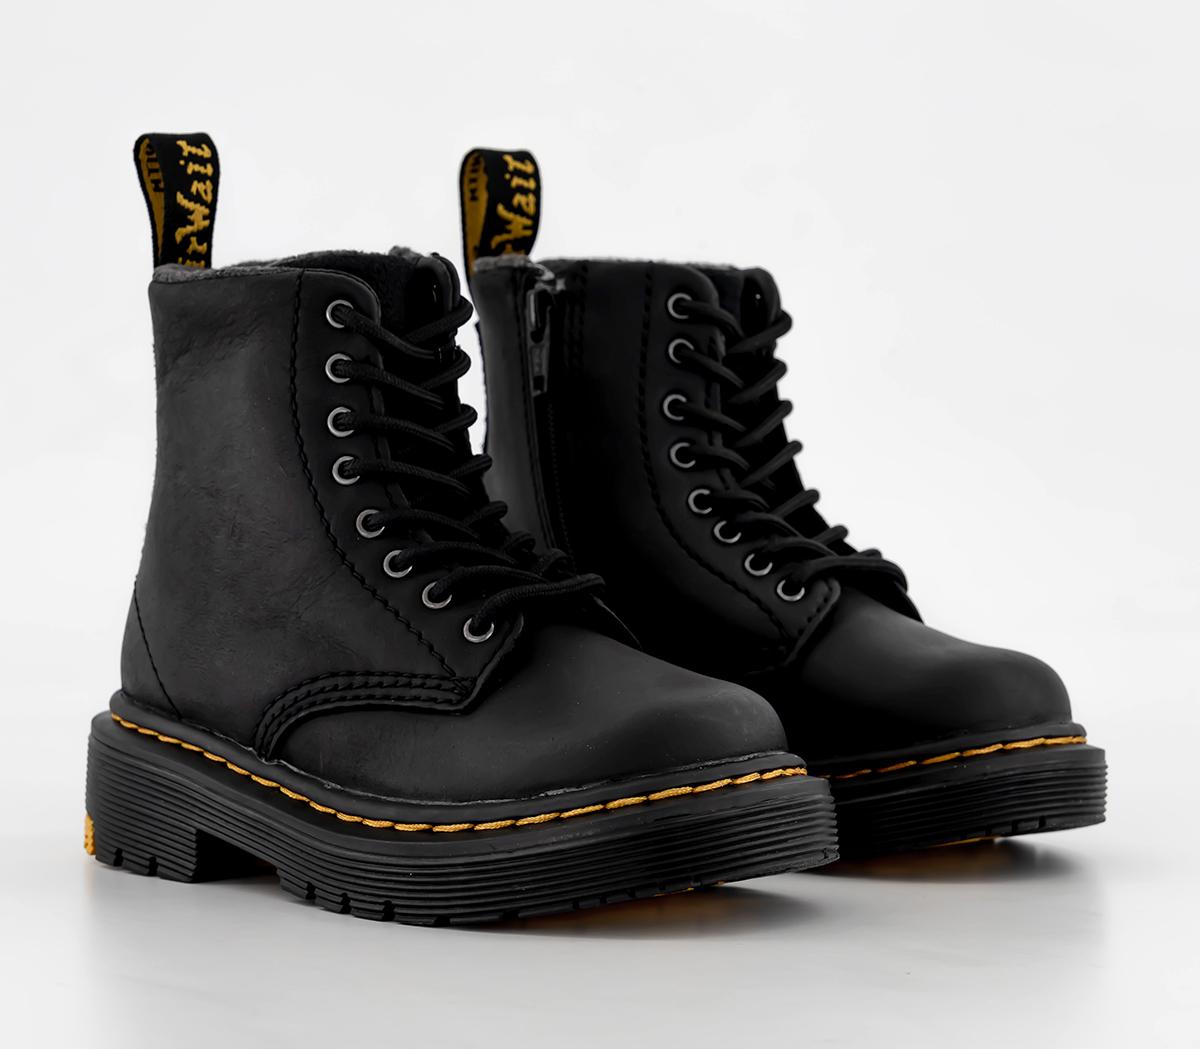 Dr. Martens 1460 Toddler Boots Black Yellowstone Black Hi Suede - Unisex